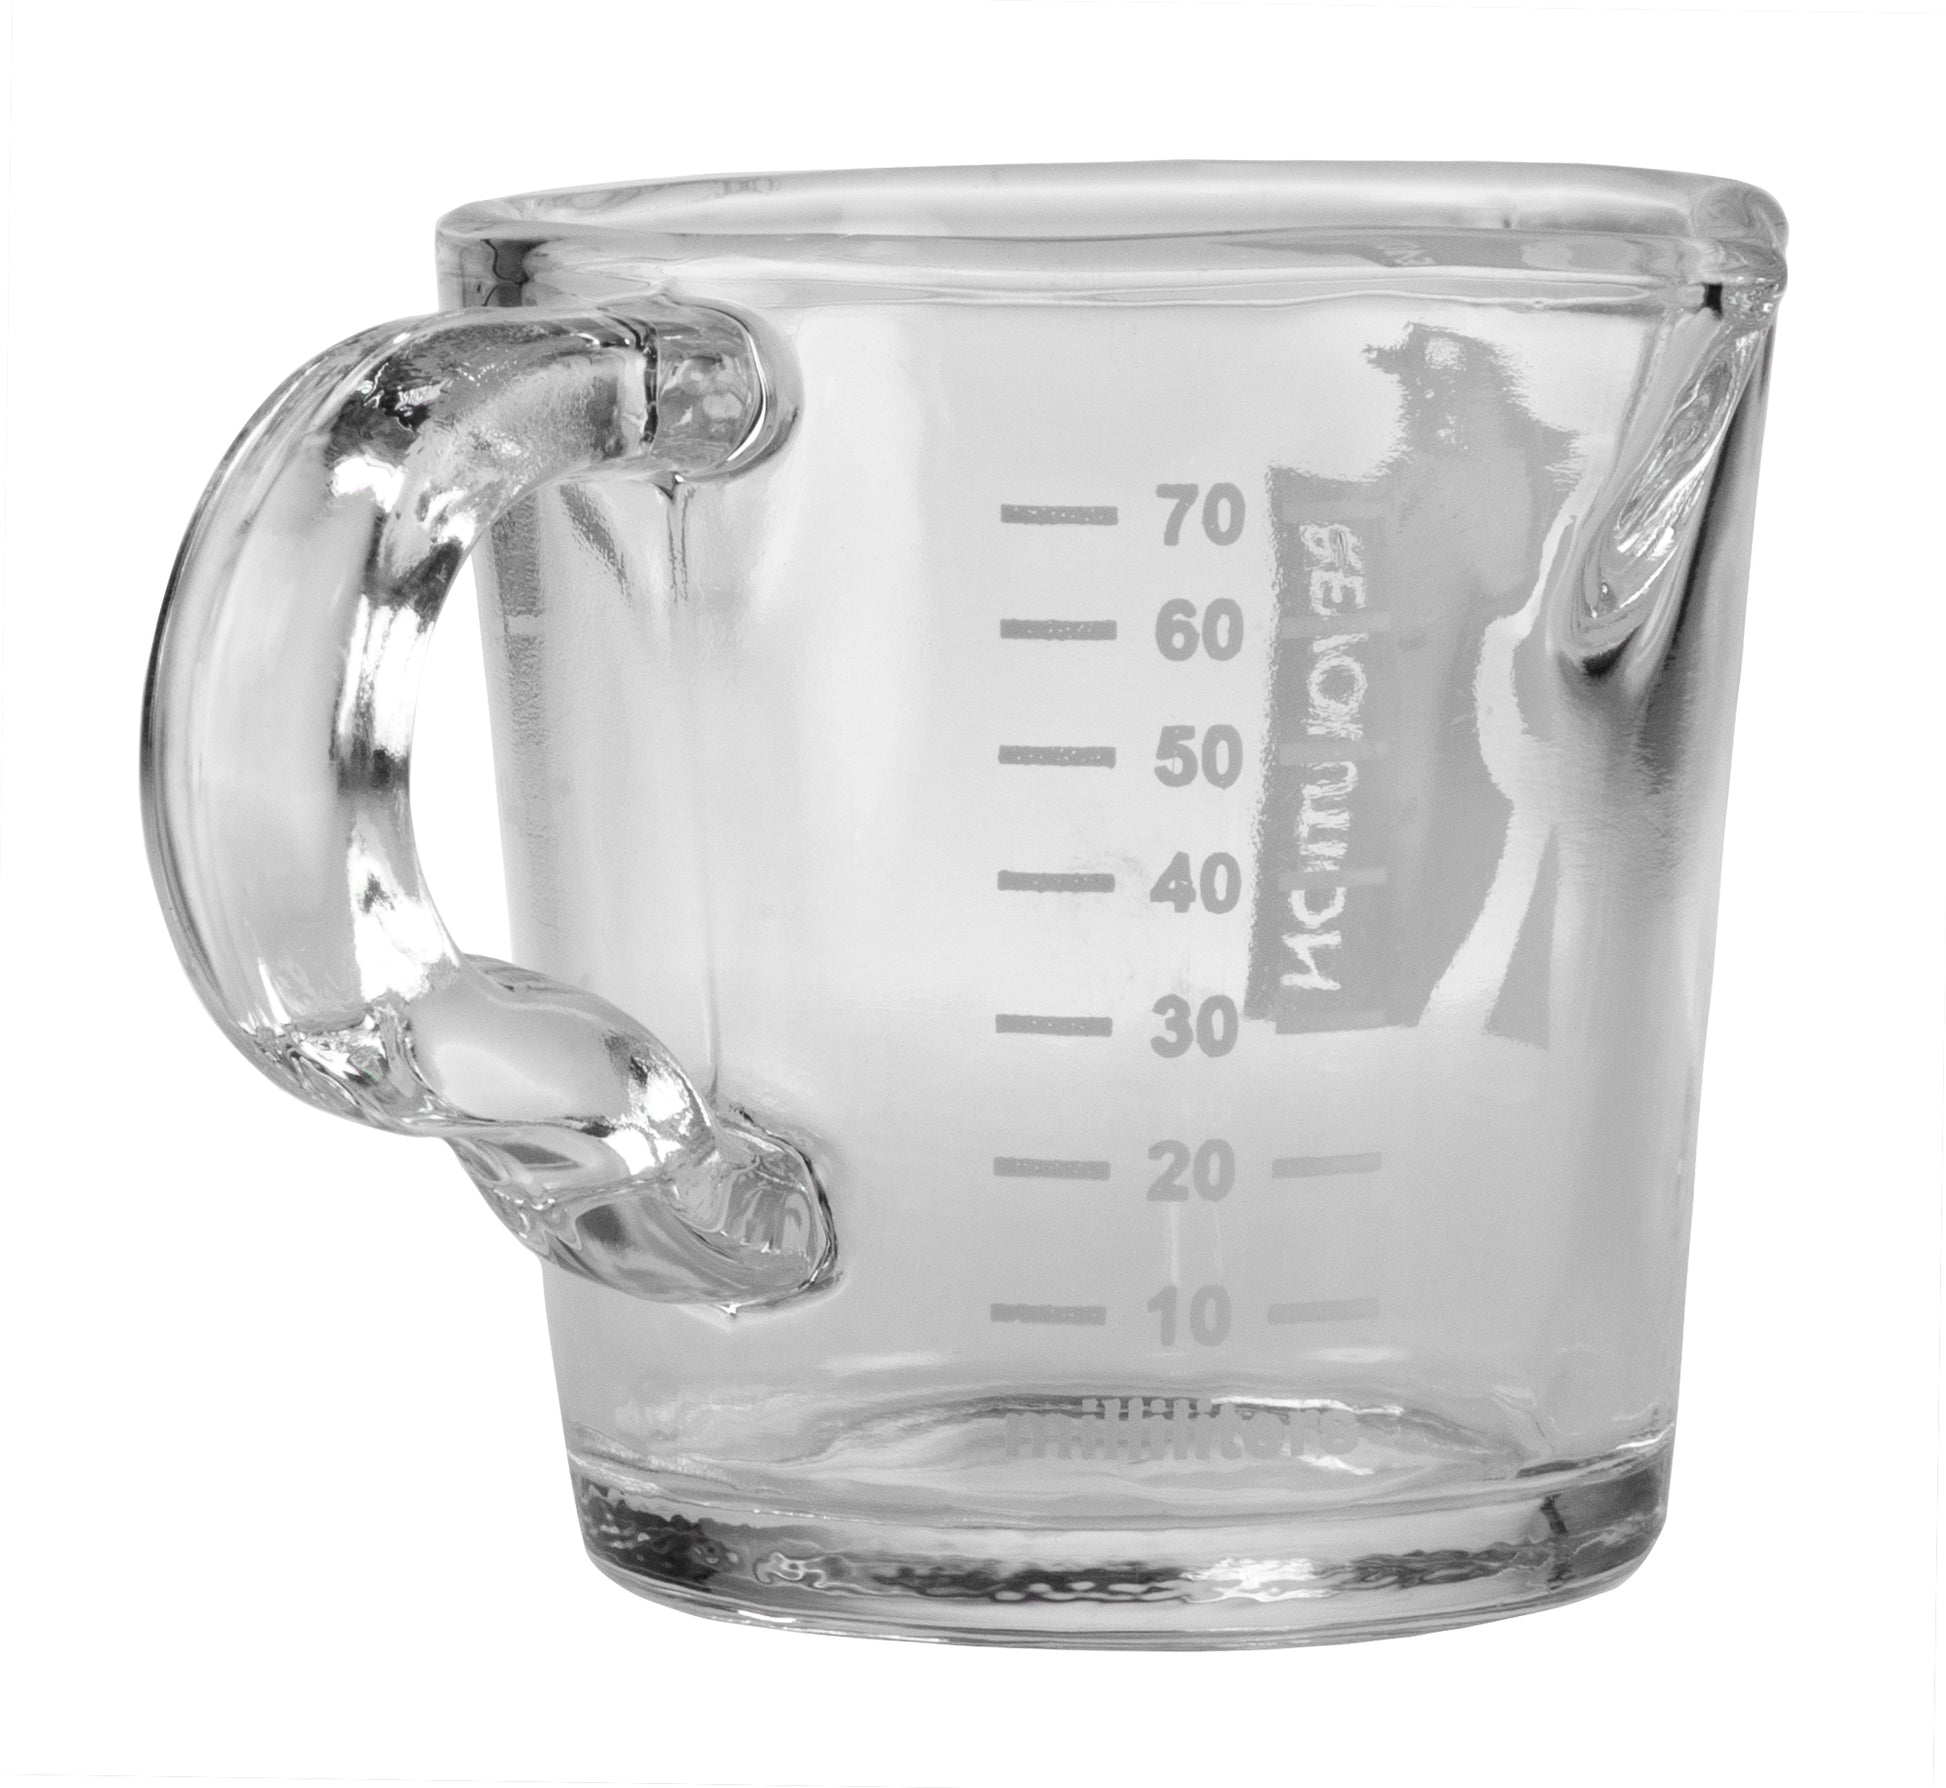 NCnnwovf 4 Ounce/120ML Square Measuring Cup Shot Glasses With Glass handle  V-Shaped Spout Espresso G…See more NCnnwovf 4 Ounce/120ML Square Measuring